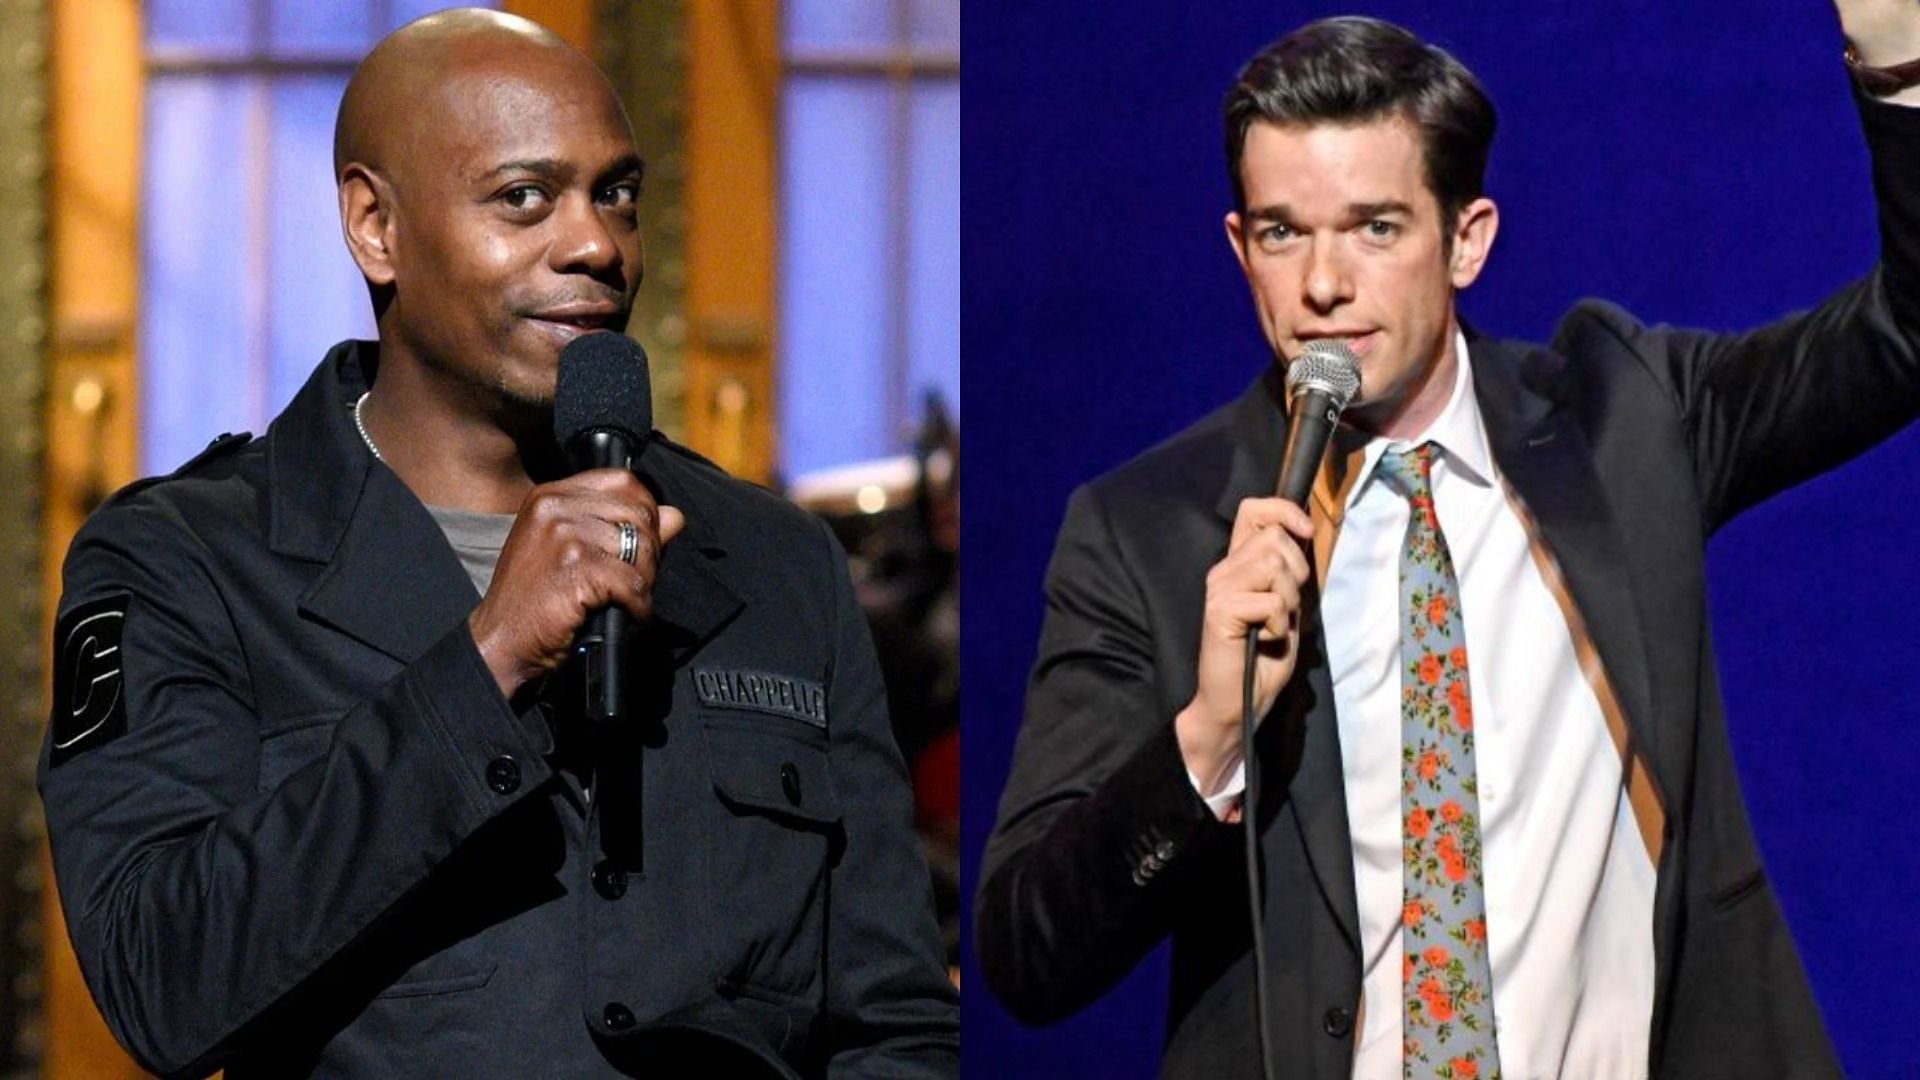 John Mulaney has yet to comment on Dave Chappelle&#039;s remarks during his show on May 20. (Image via Getty Images/Will Heath/Kevin Mazur)